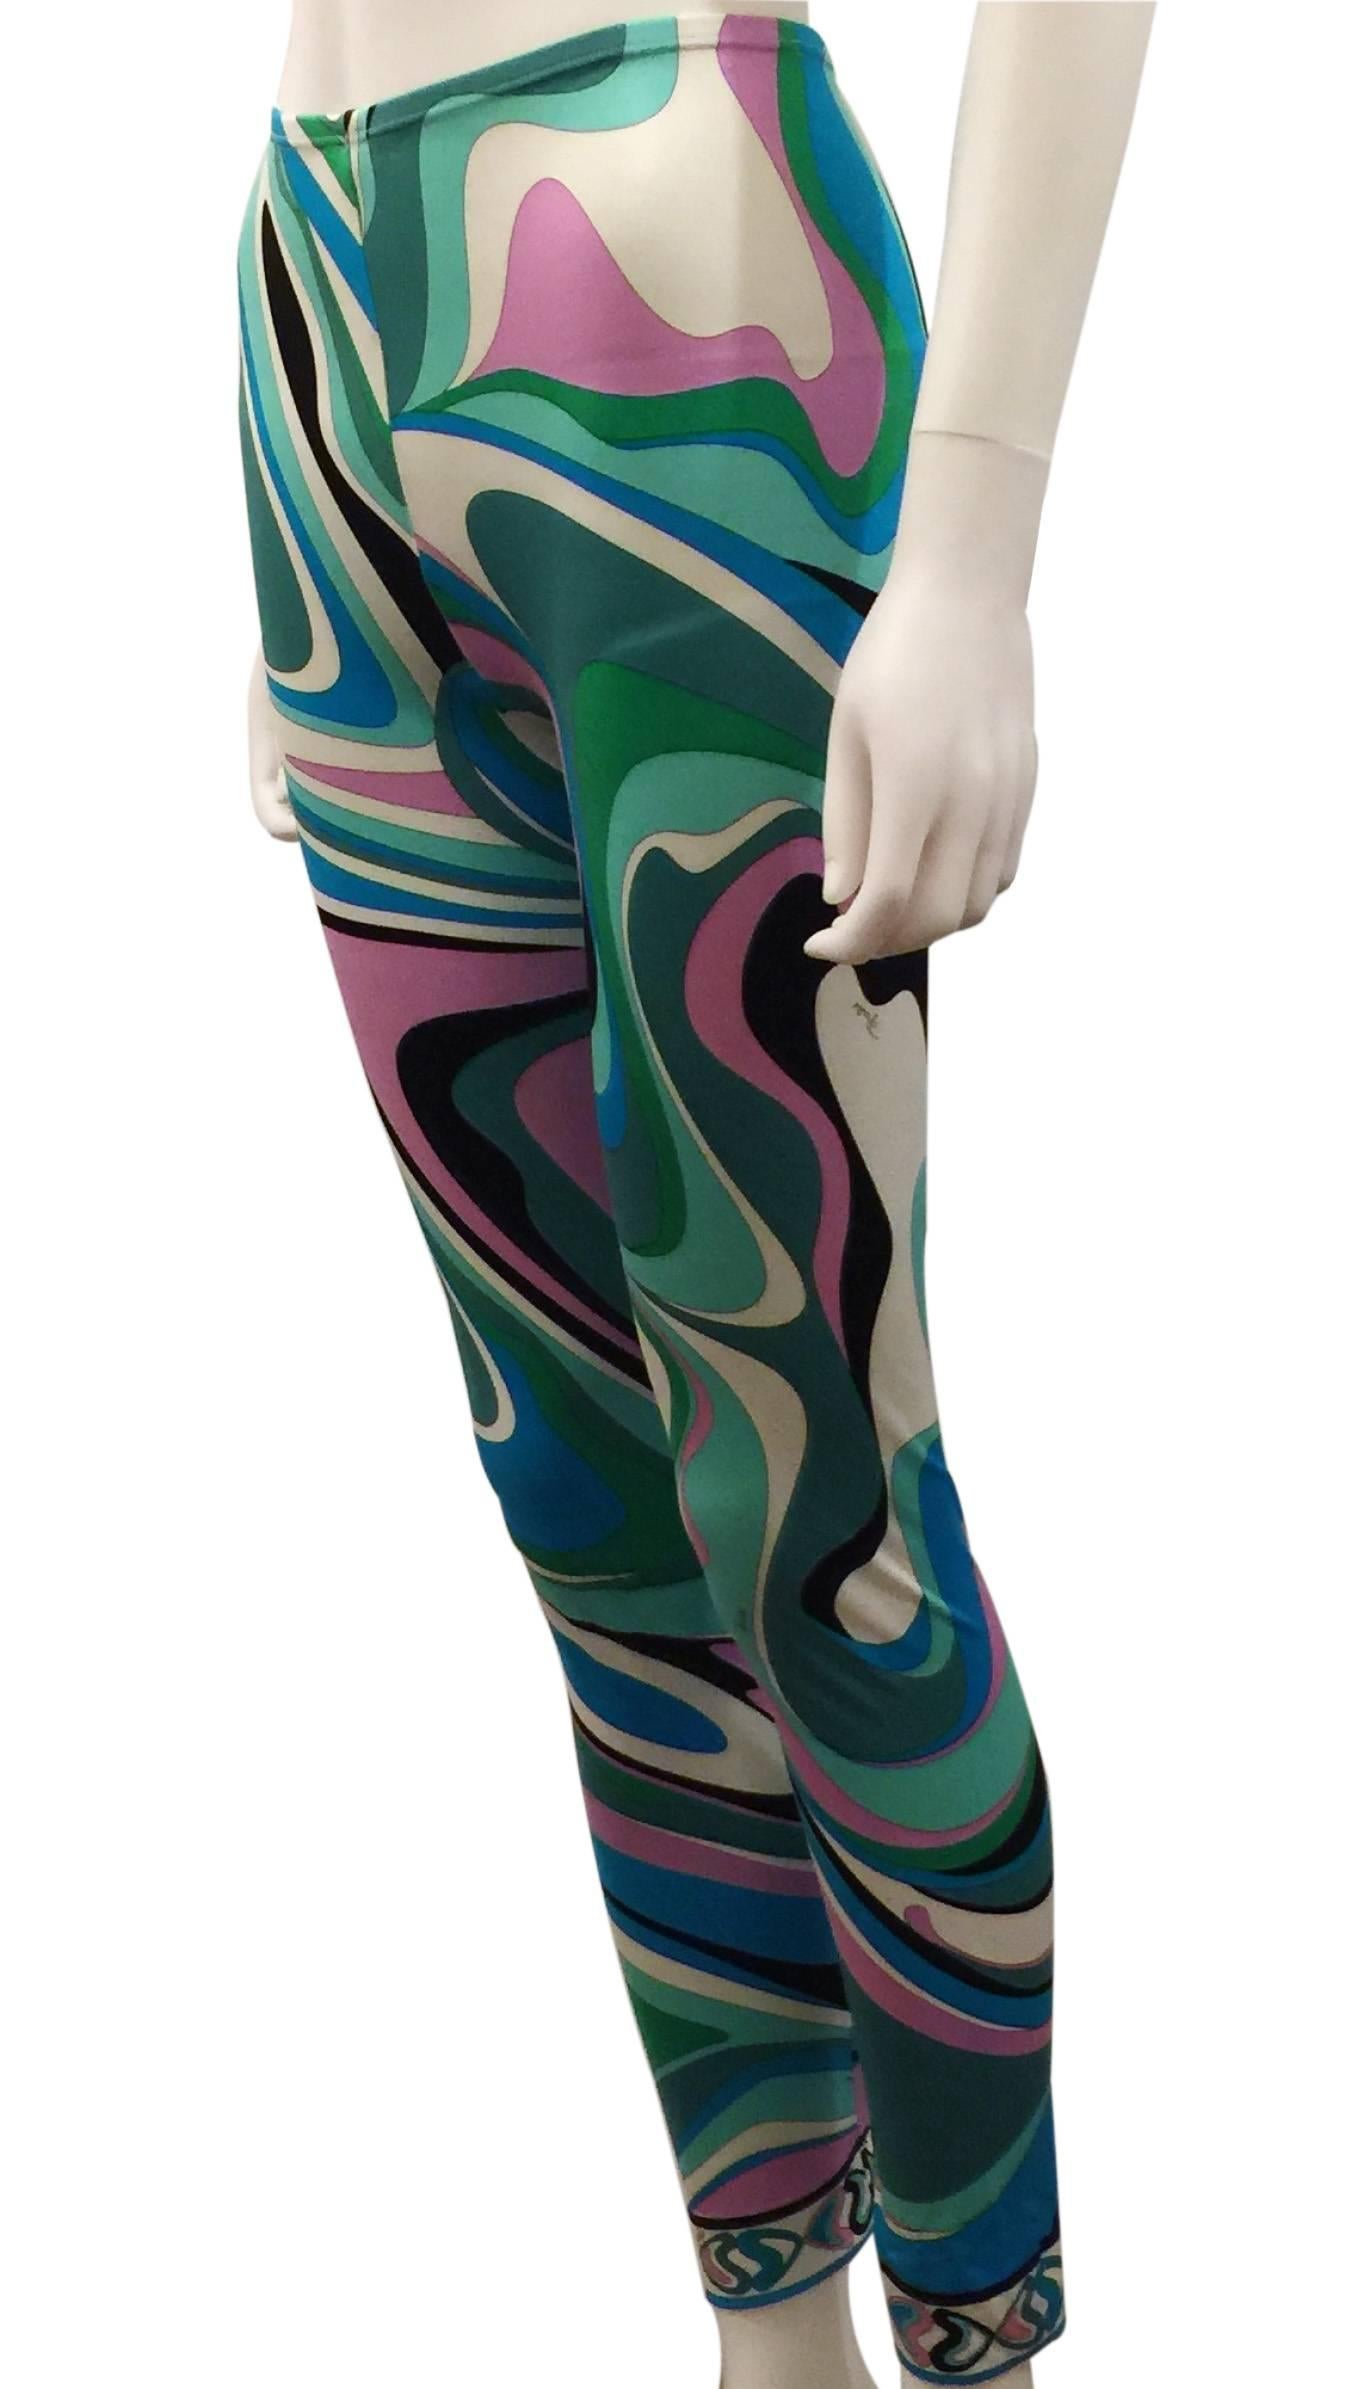 Emilio Pucci Leggings.  Made in Italy. Size Italian 42, French 38, USA 8, UK 10.  Material 80% Polyamide 20% Elastane.  From Pucci’s 1980’s Collection.  Pucci’ s psychedelic intense vivid colours of pink, turquoise, greens, blues, black and white